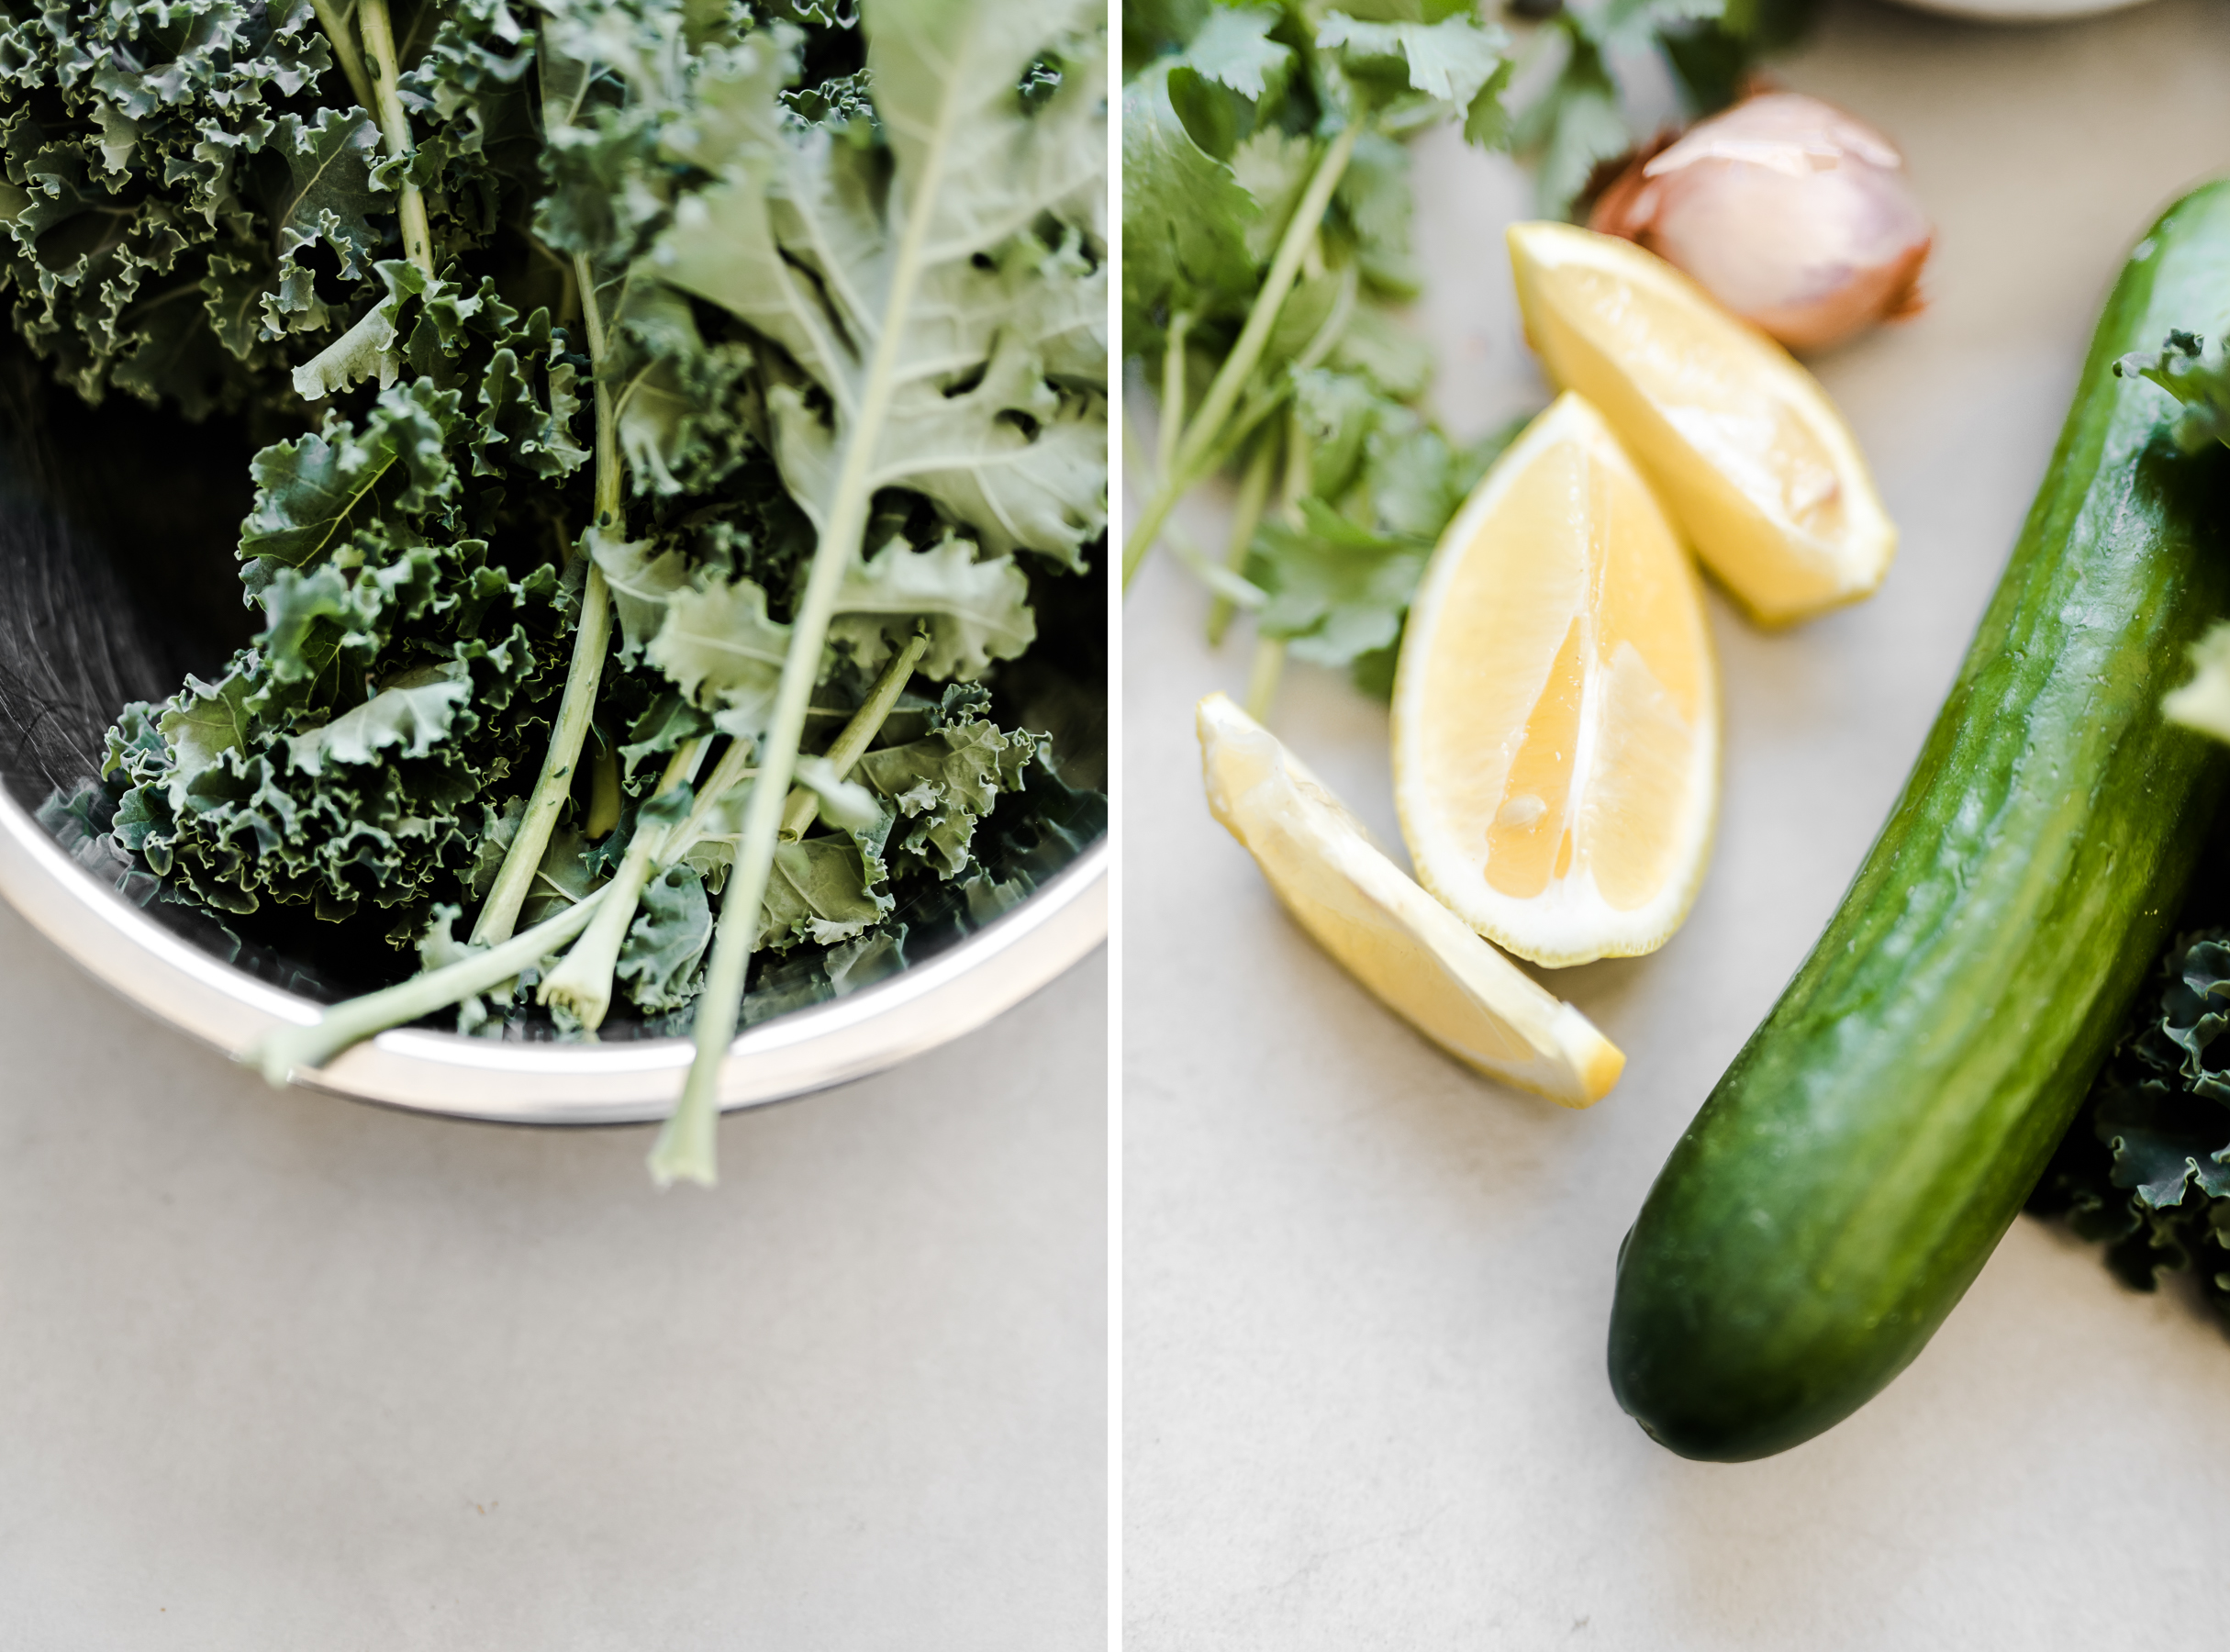 Green Kale Salad with Preserved Lemon Tahini Dressing | Gather a Table